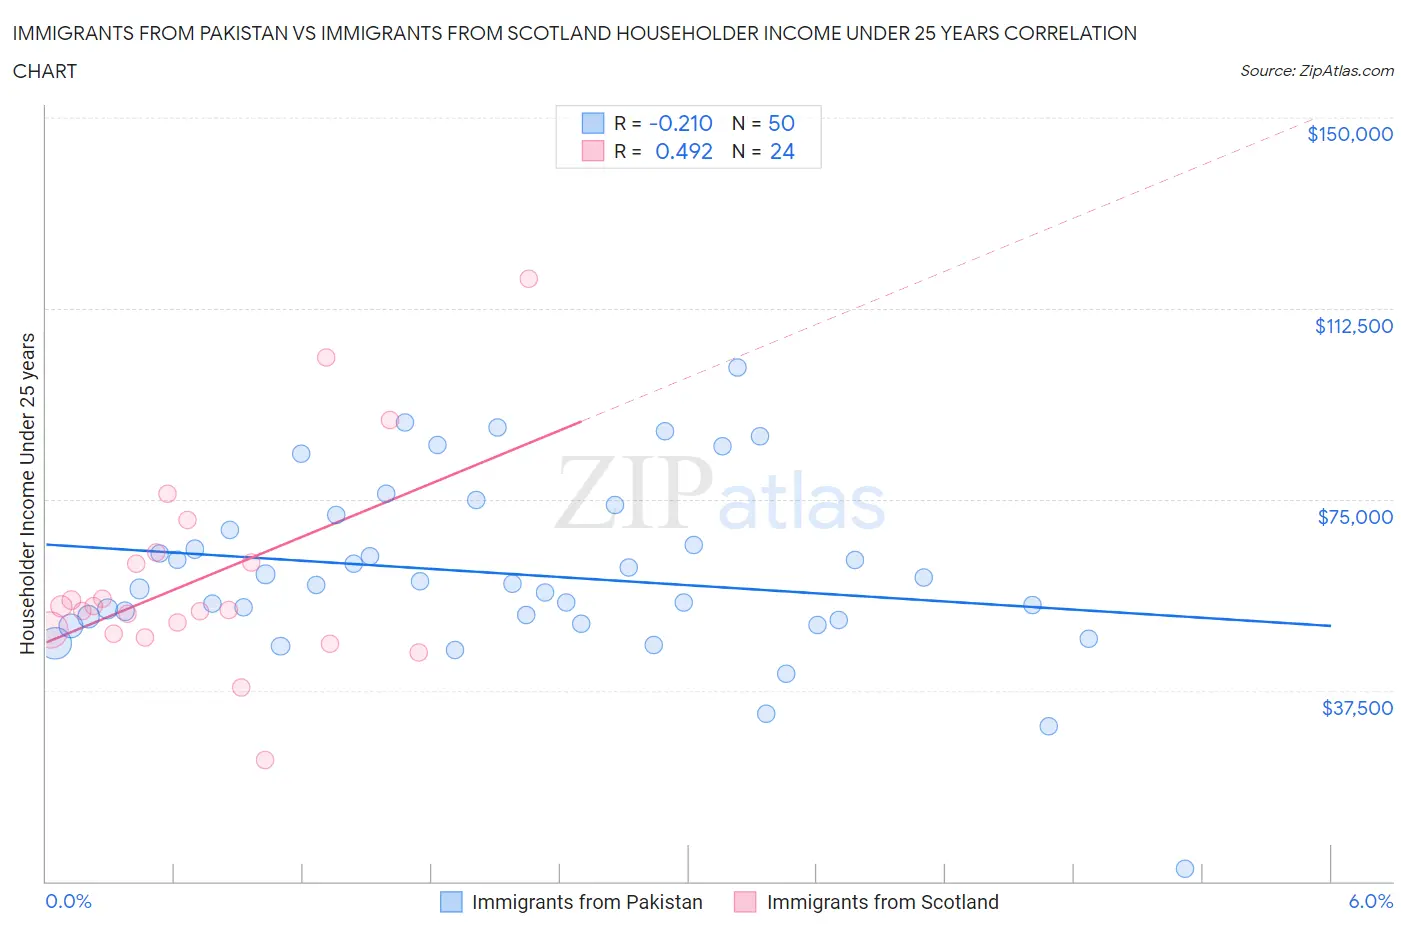 Immigrants from Pakistan vs Immigrants from Scotland Householder Income Under 25 years